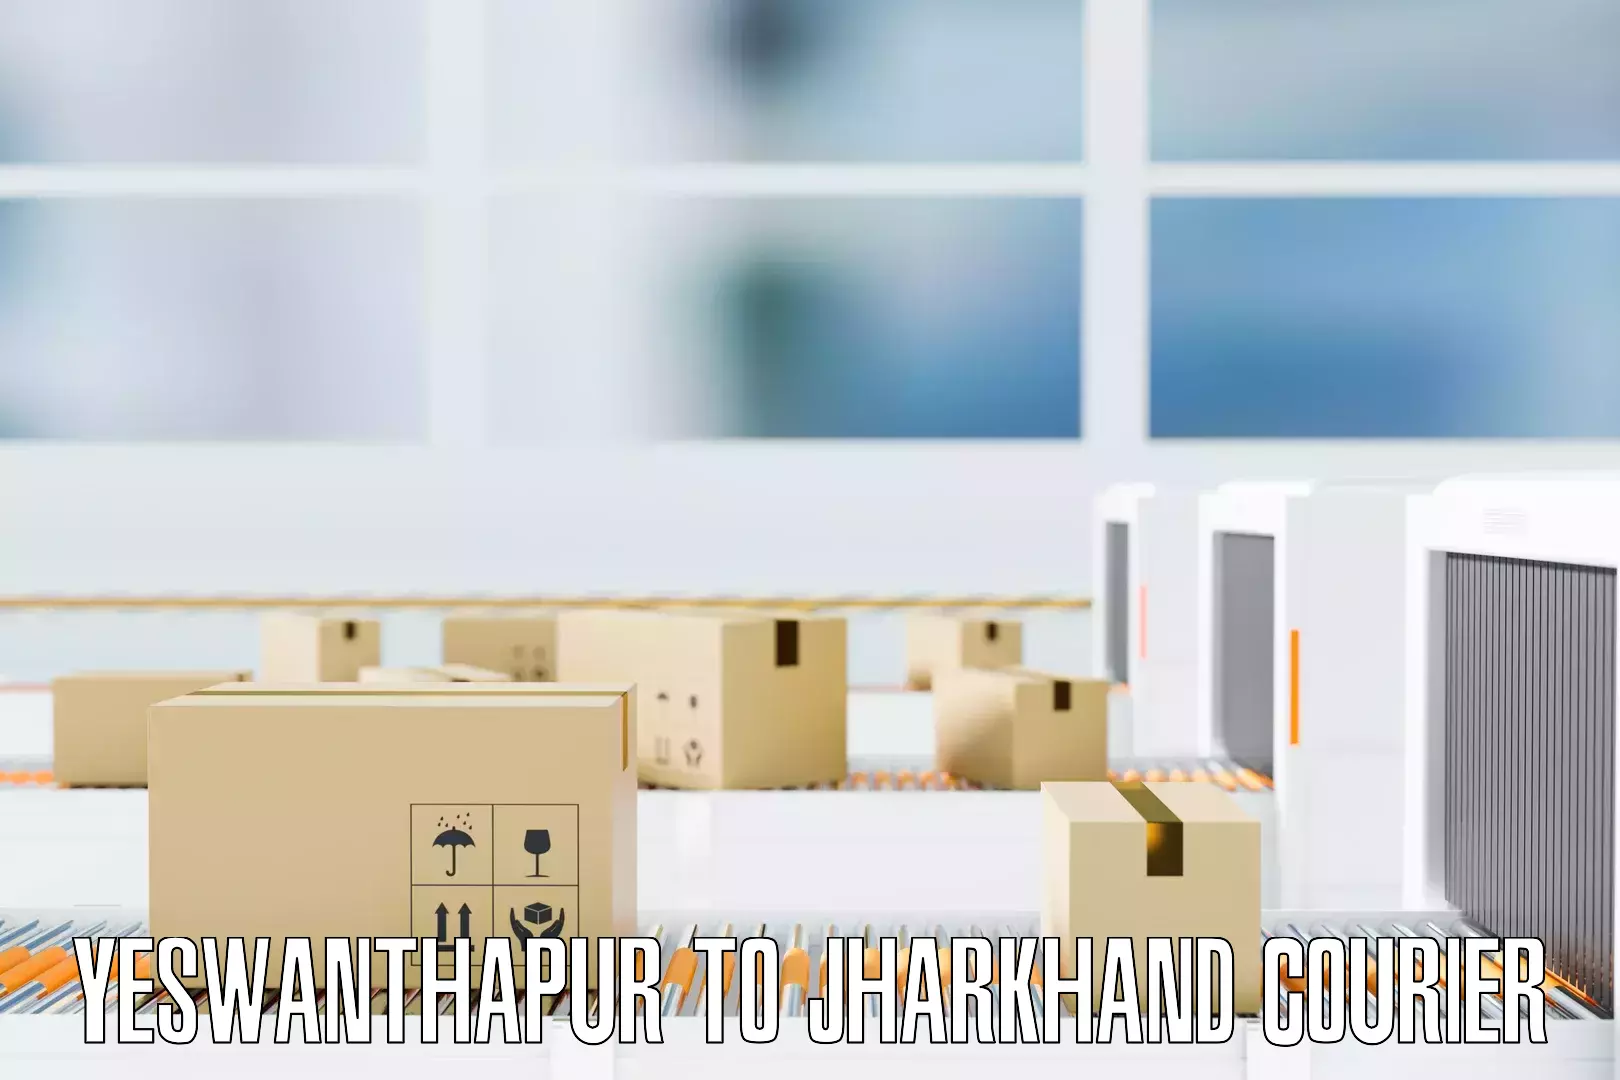 Furniture delivery service Yeswanthapur to Jharkhand